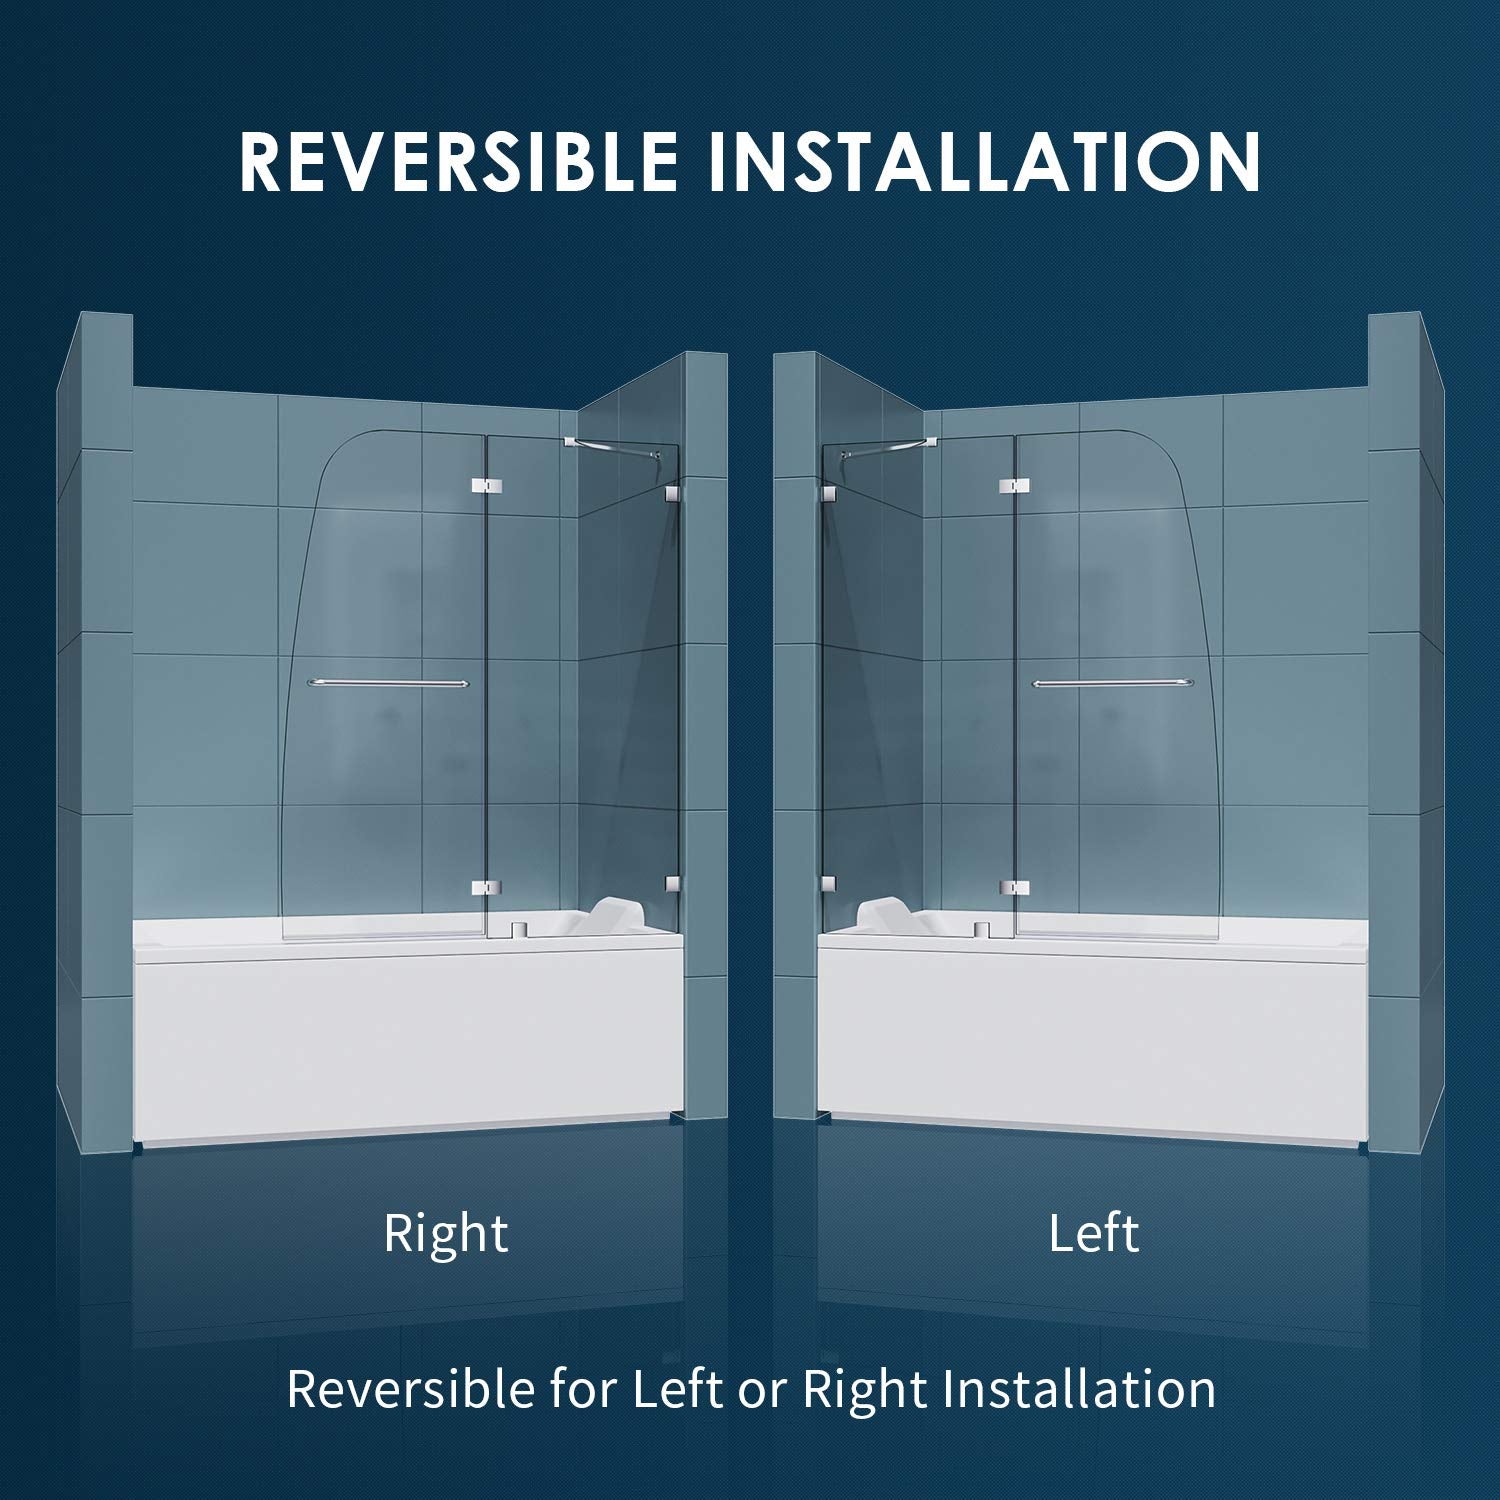 Reversible for right or left door opening installation. Suitable for installation on any straight bathtub.